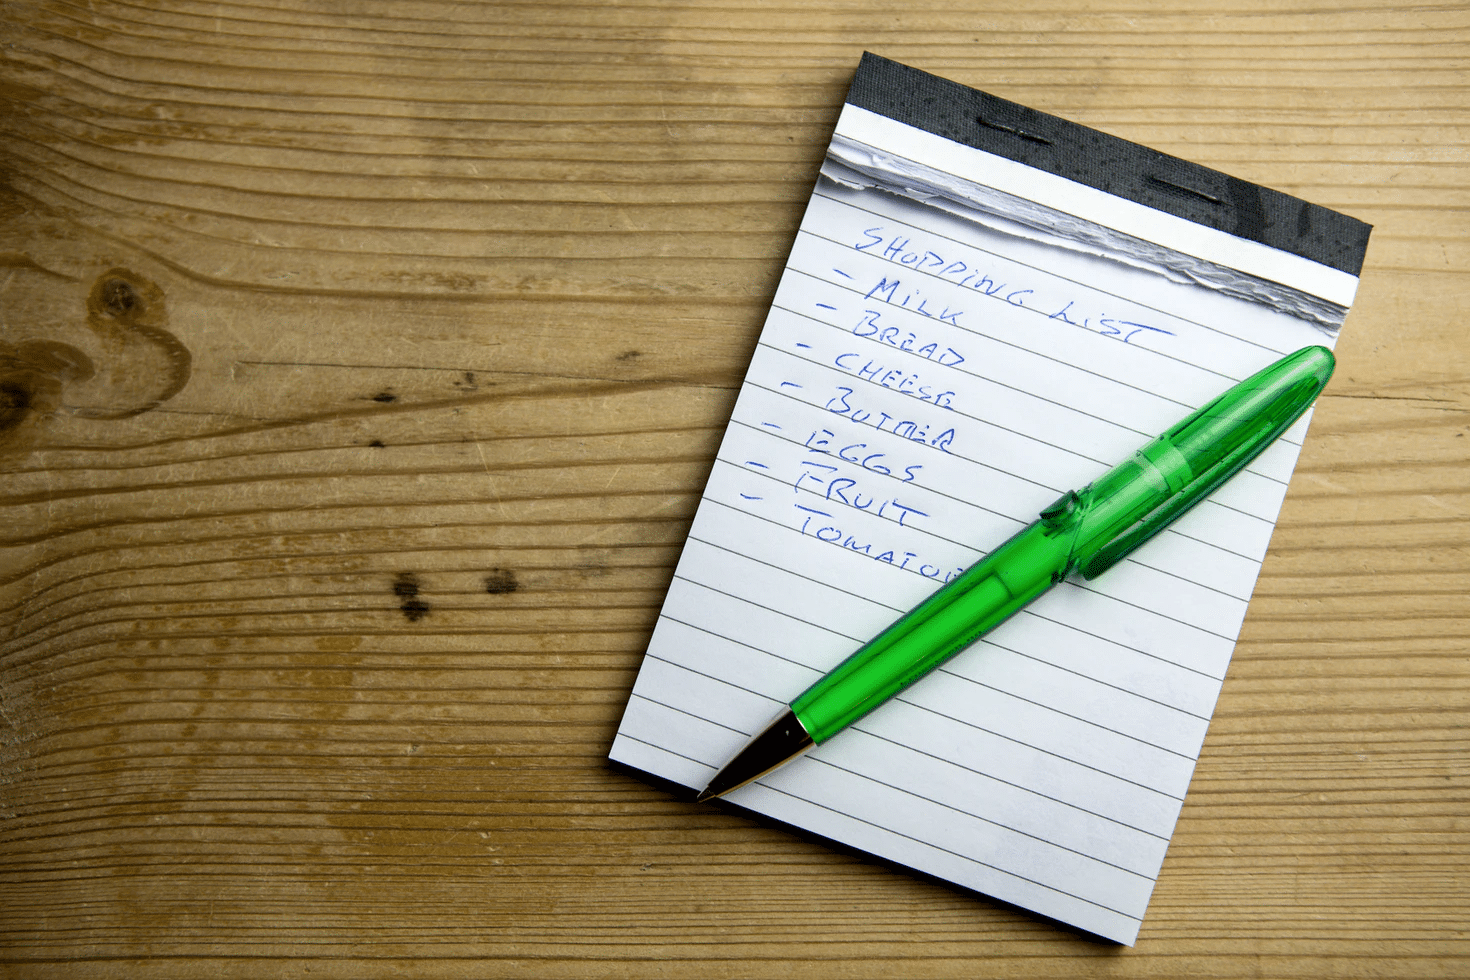 Make a grocery or shopping list to help save money